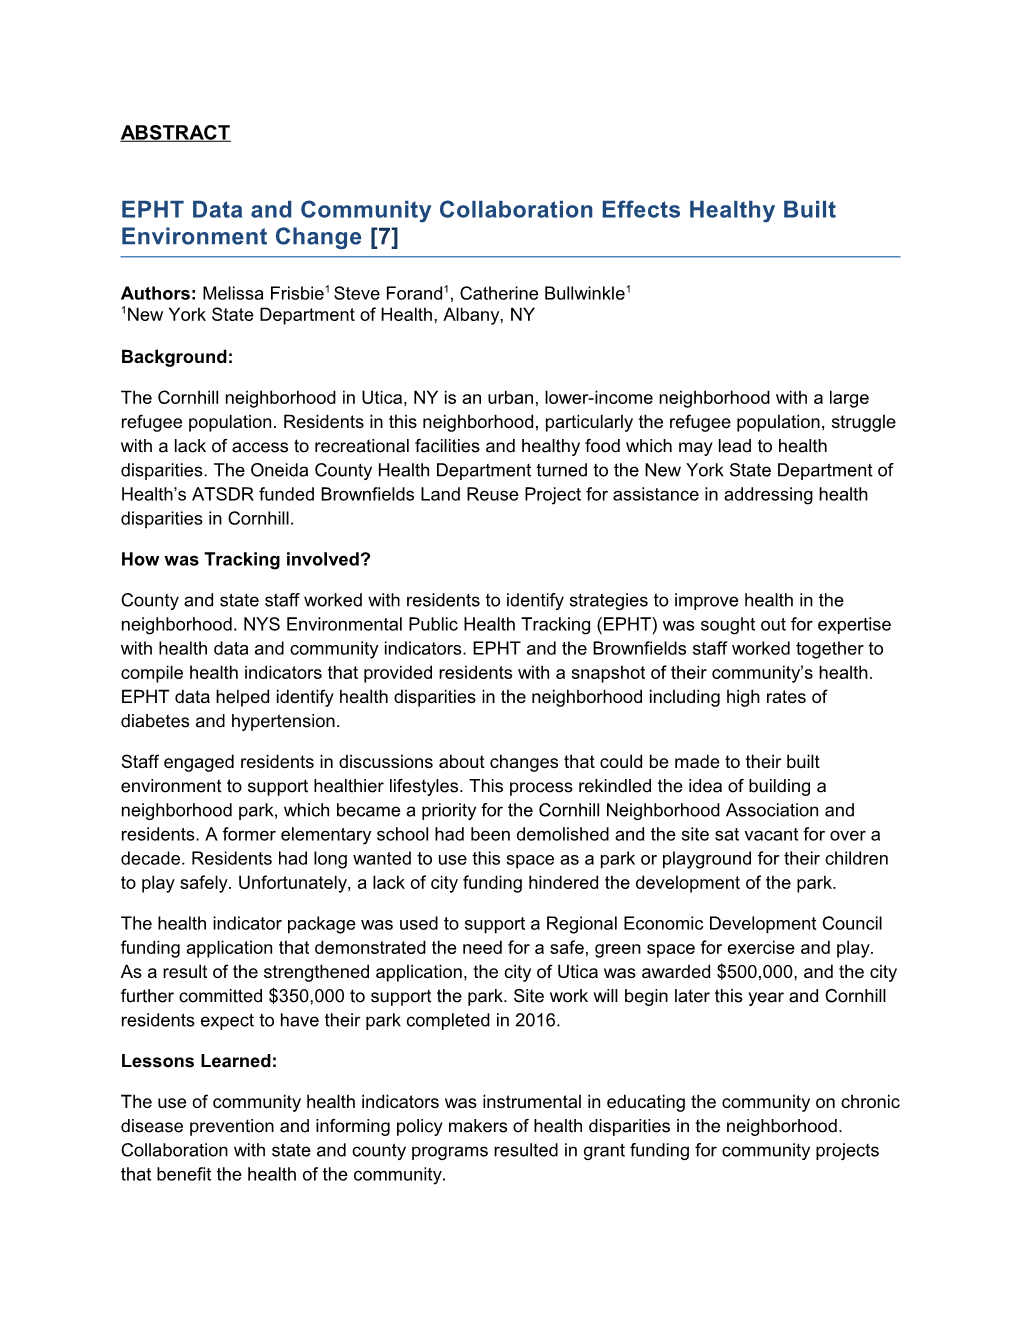 EPHT Data and Community Collaboration Effects Healthy Built Environment Change 7